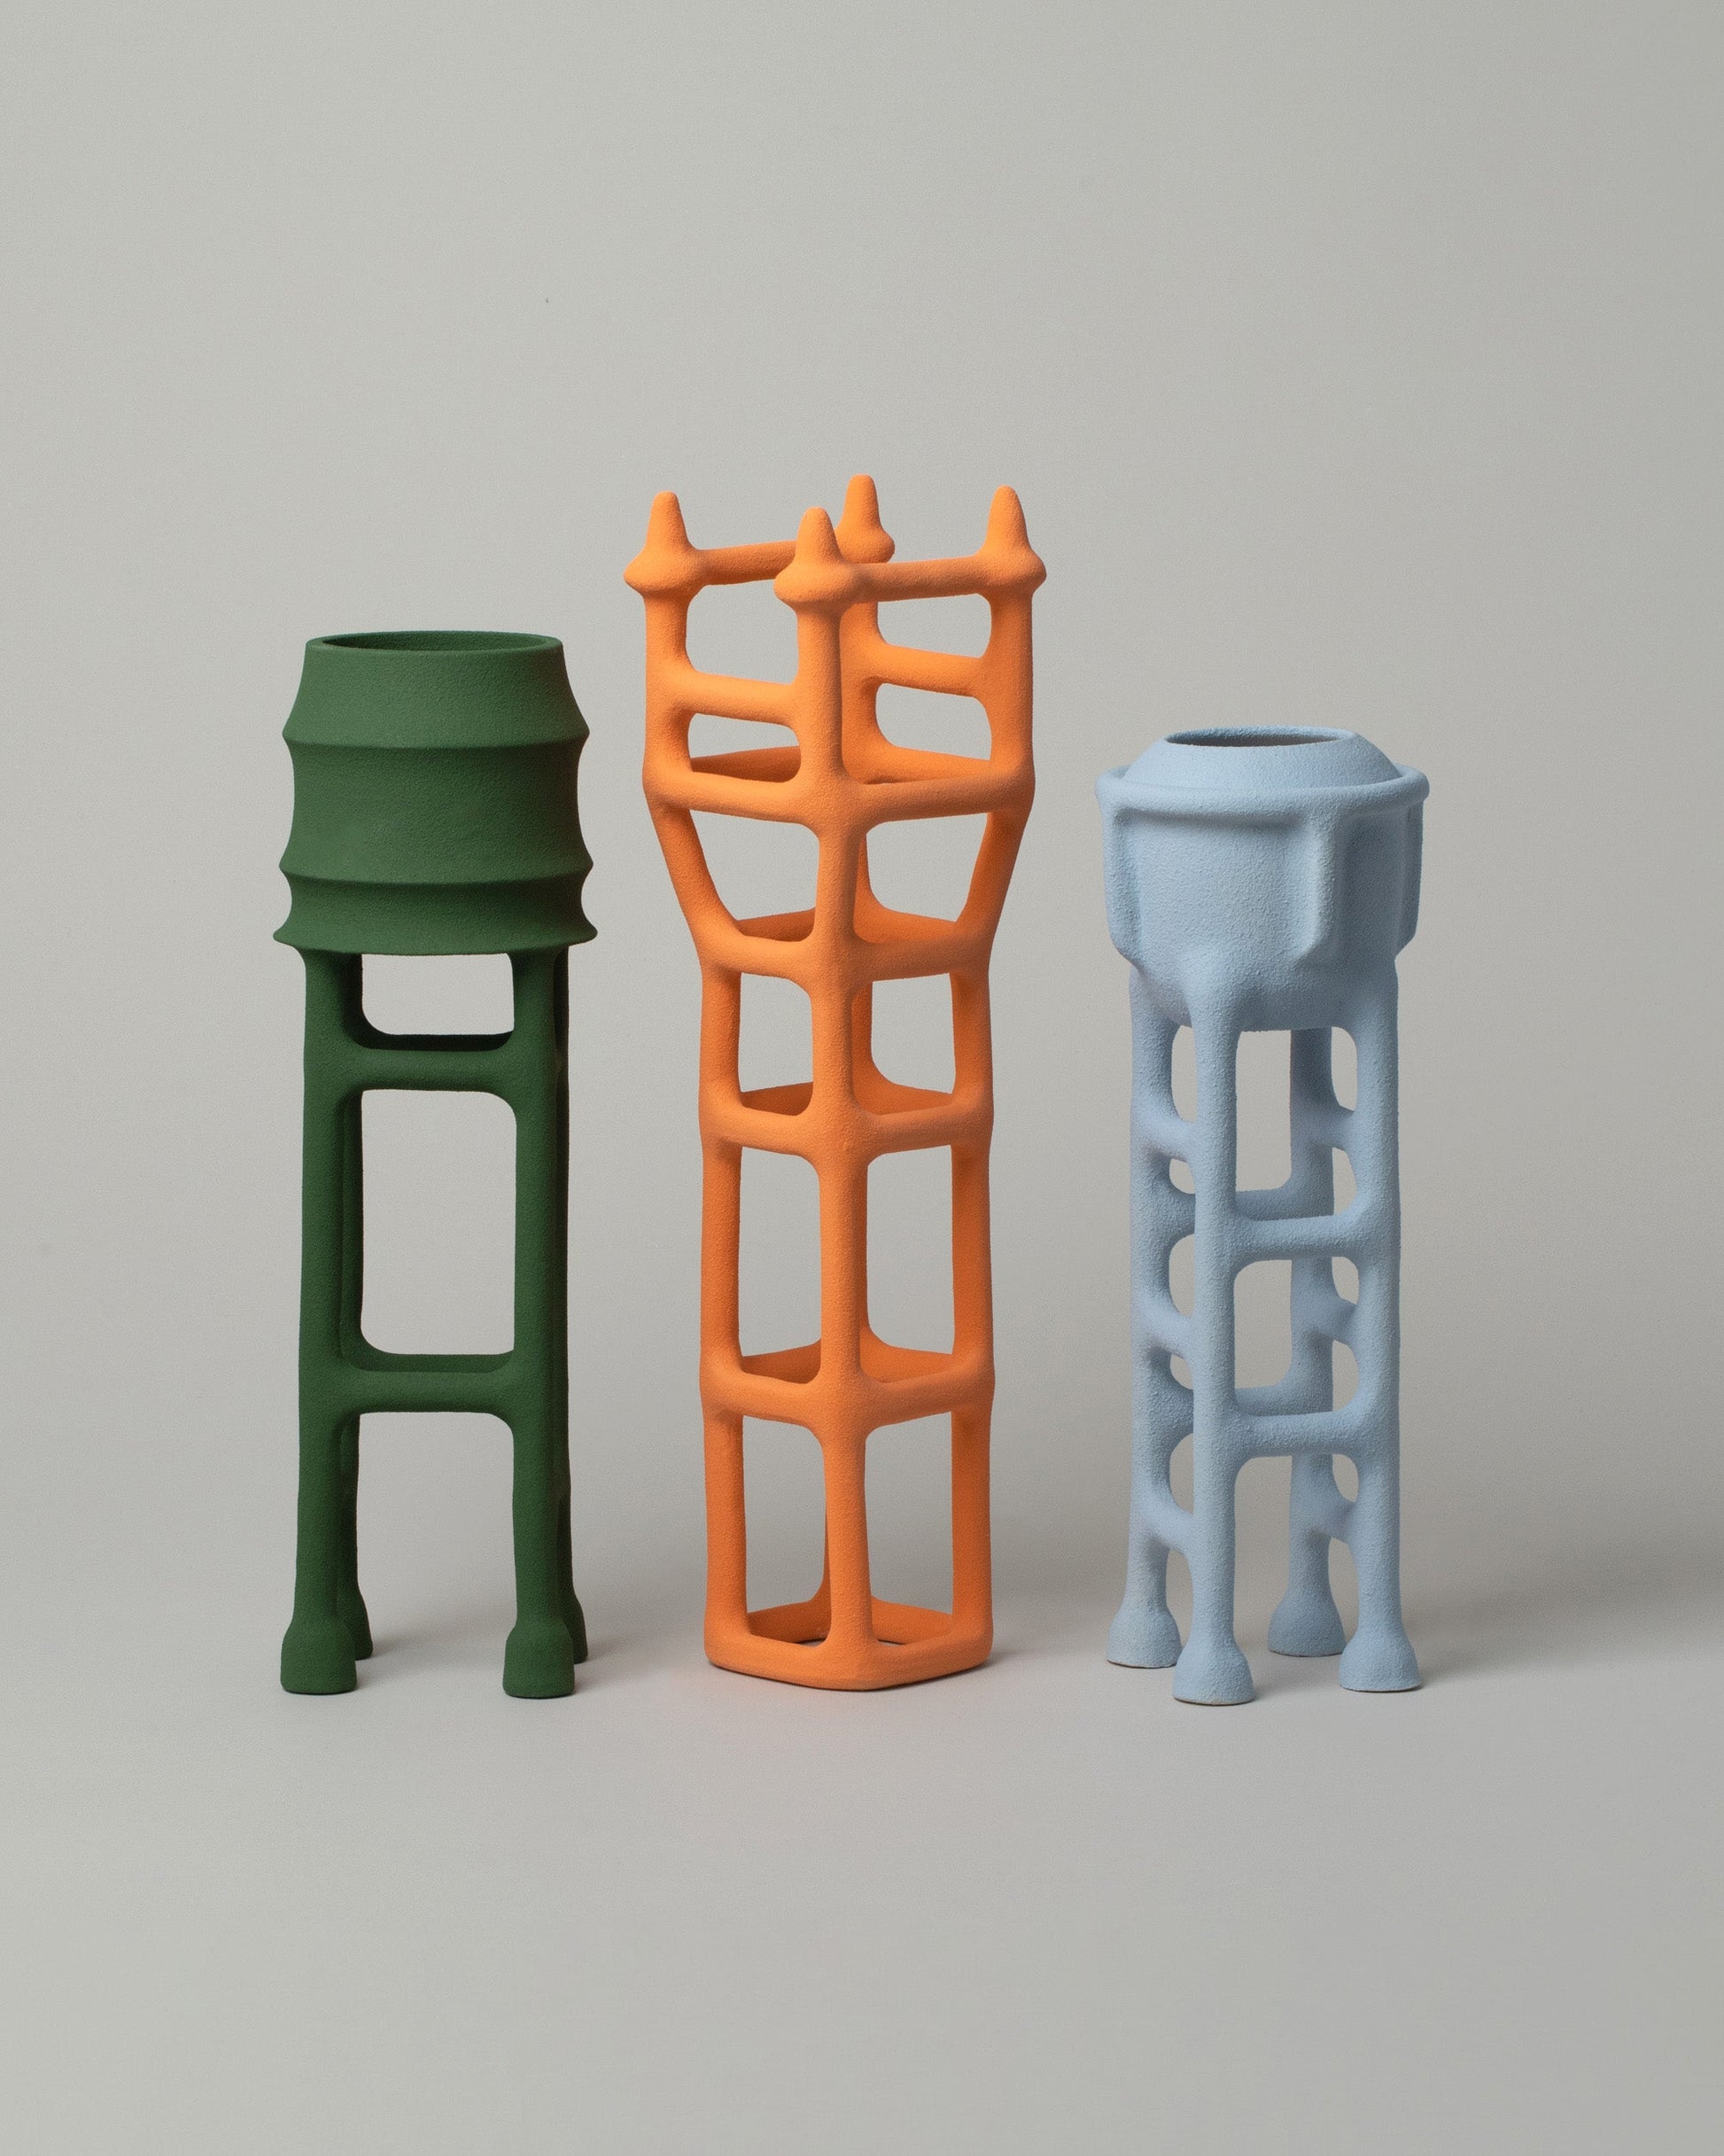  Group photo of Solenne Belloir Forest Green, Orange, and Pale Blue Water Towers on light color background.